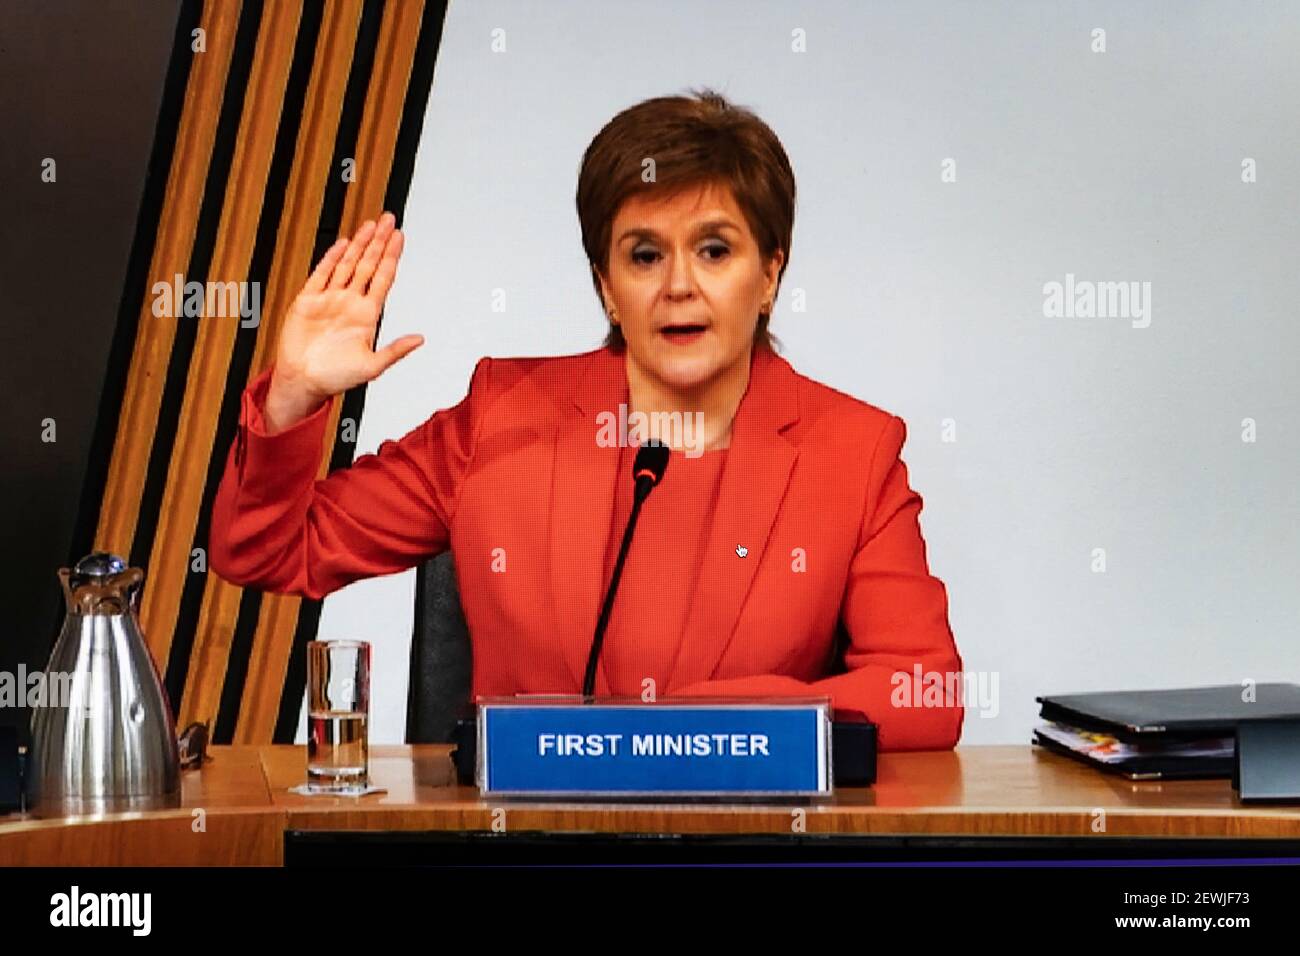 Edinburgh, Scotland, UK. 3 Mar 2021. Live streaming of First Minister of Scotland Nicola Sturgeon at Scottish Parliament in Edinburgh to give testimony to the Committee on the Scottish Government Handling of Harassment Complaints held by the Scottish Government . Iain Masterton/Alamy Live News Stock Photo